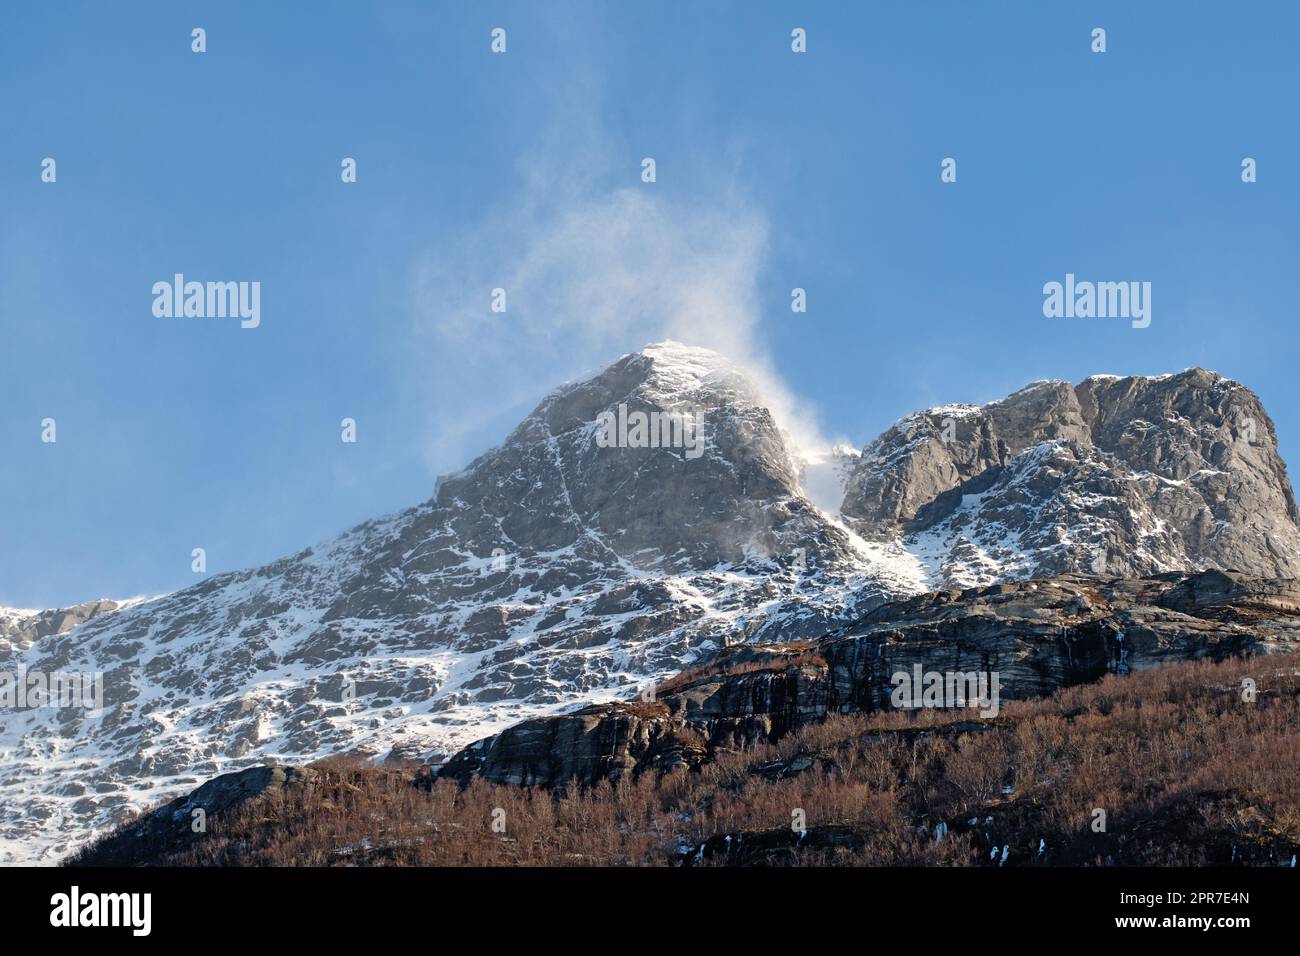 Beautiful landscape of a snowy mountain top with a blue sky and copy space. A streaming peak with frost on a winter afternoon. Peaceful and scenic outdoors with a summit in nature Stock Photo